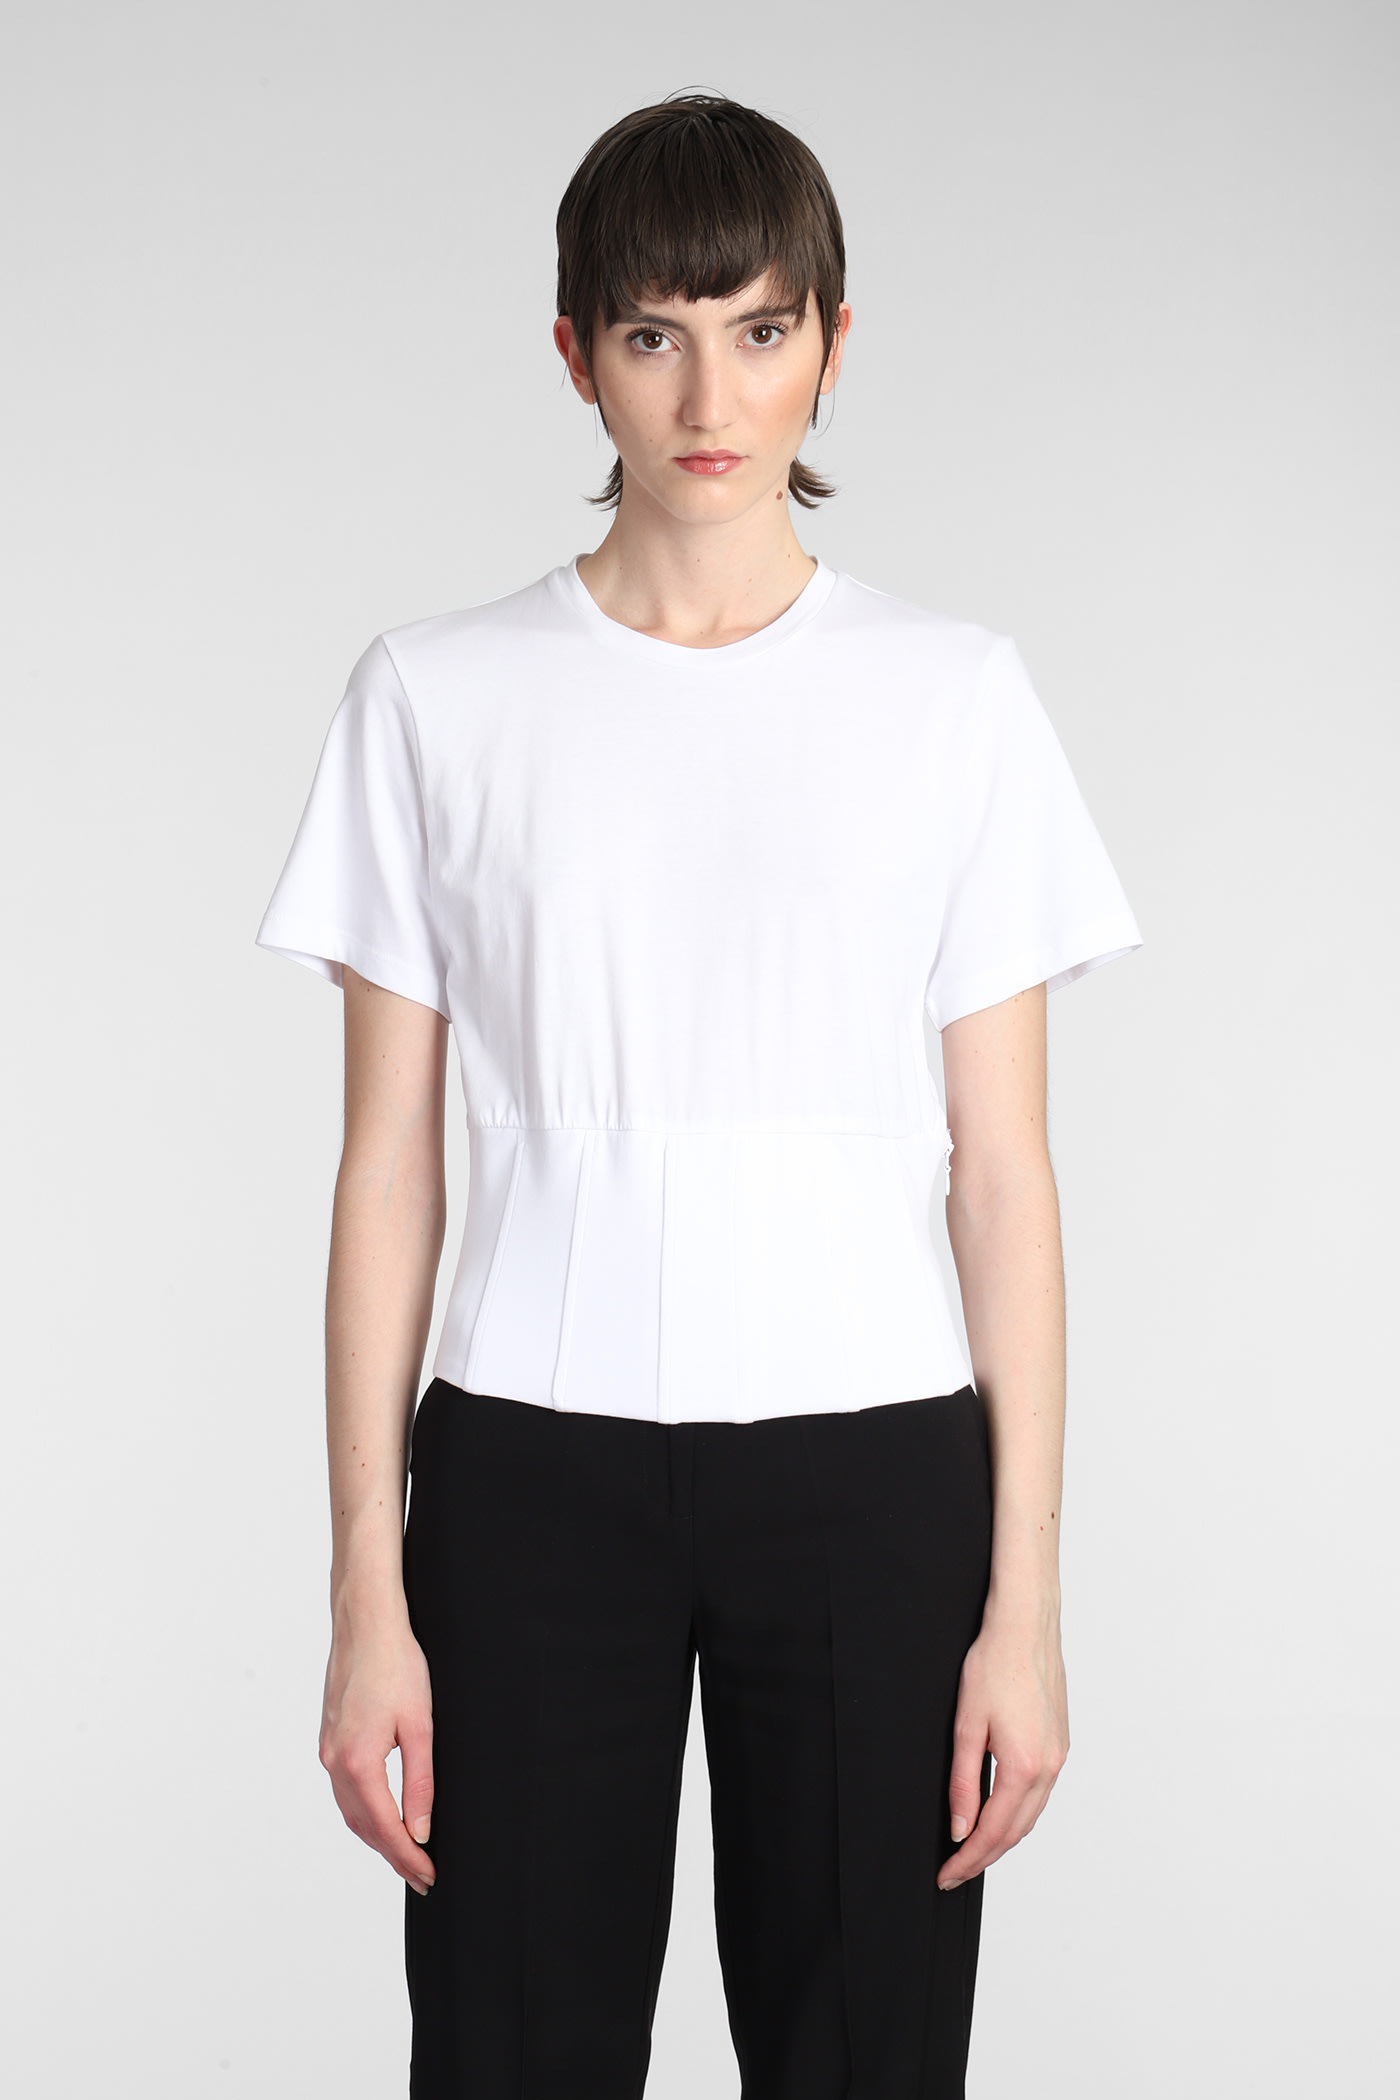 FEDERICA TOSI T-SHIRT IN WHITE COTTON